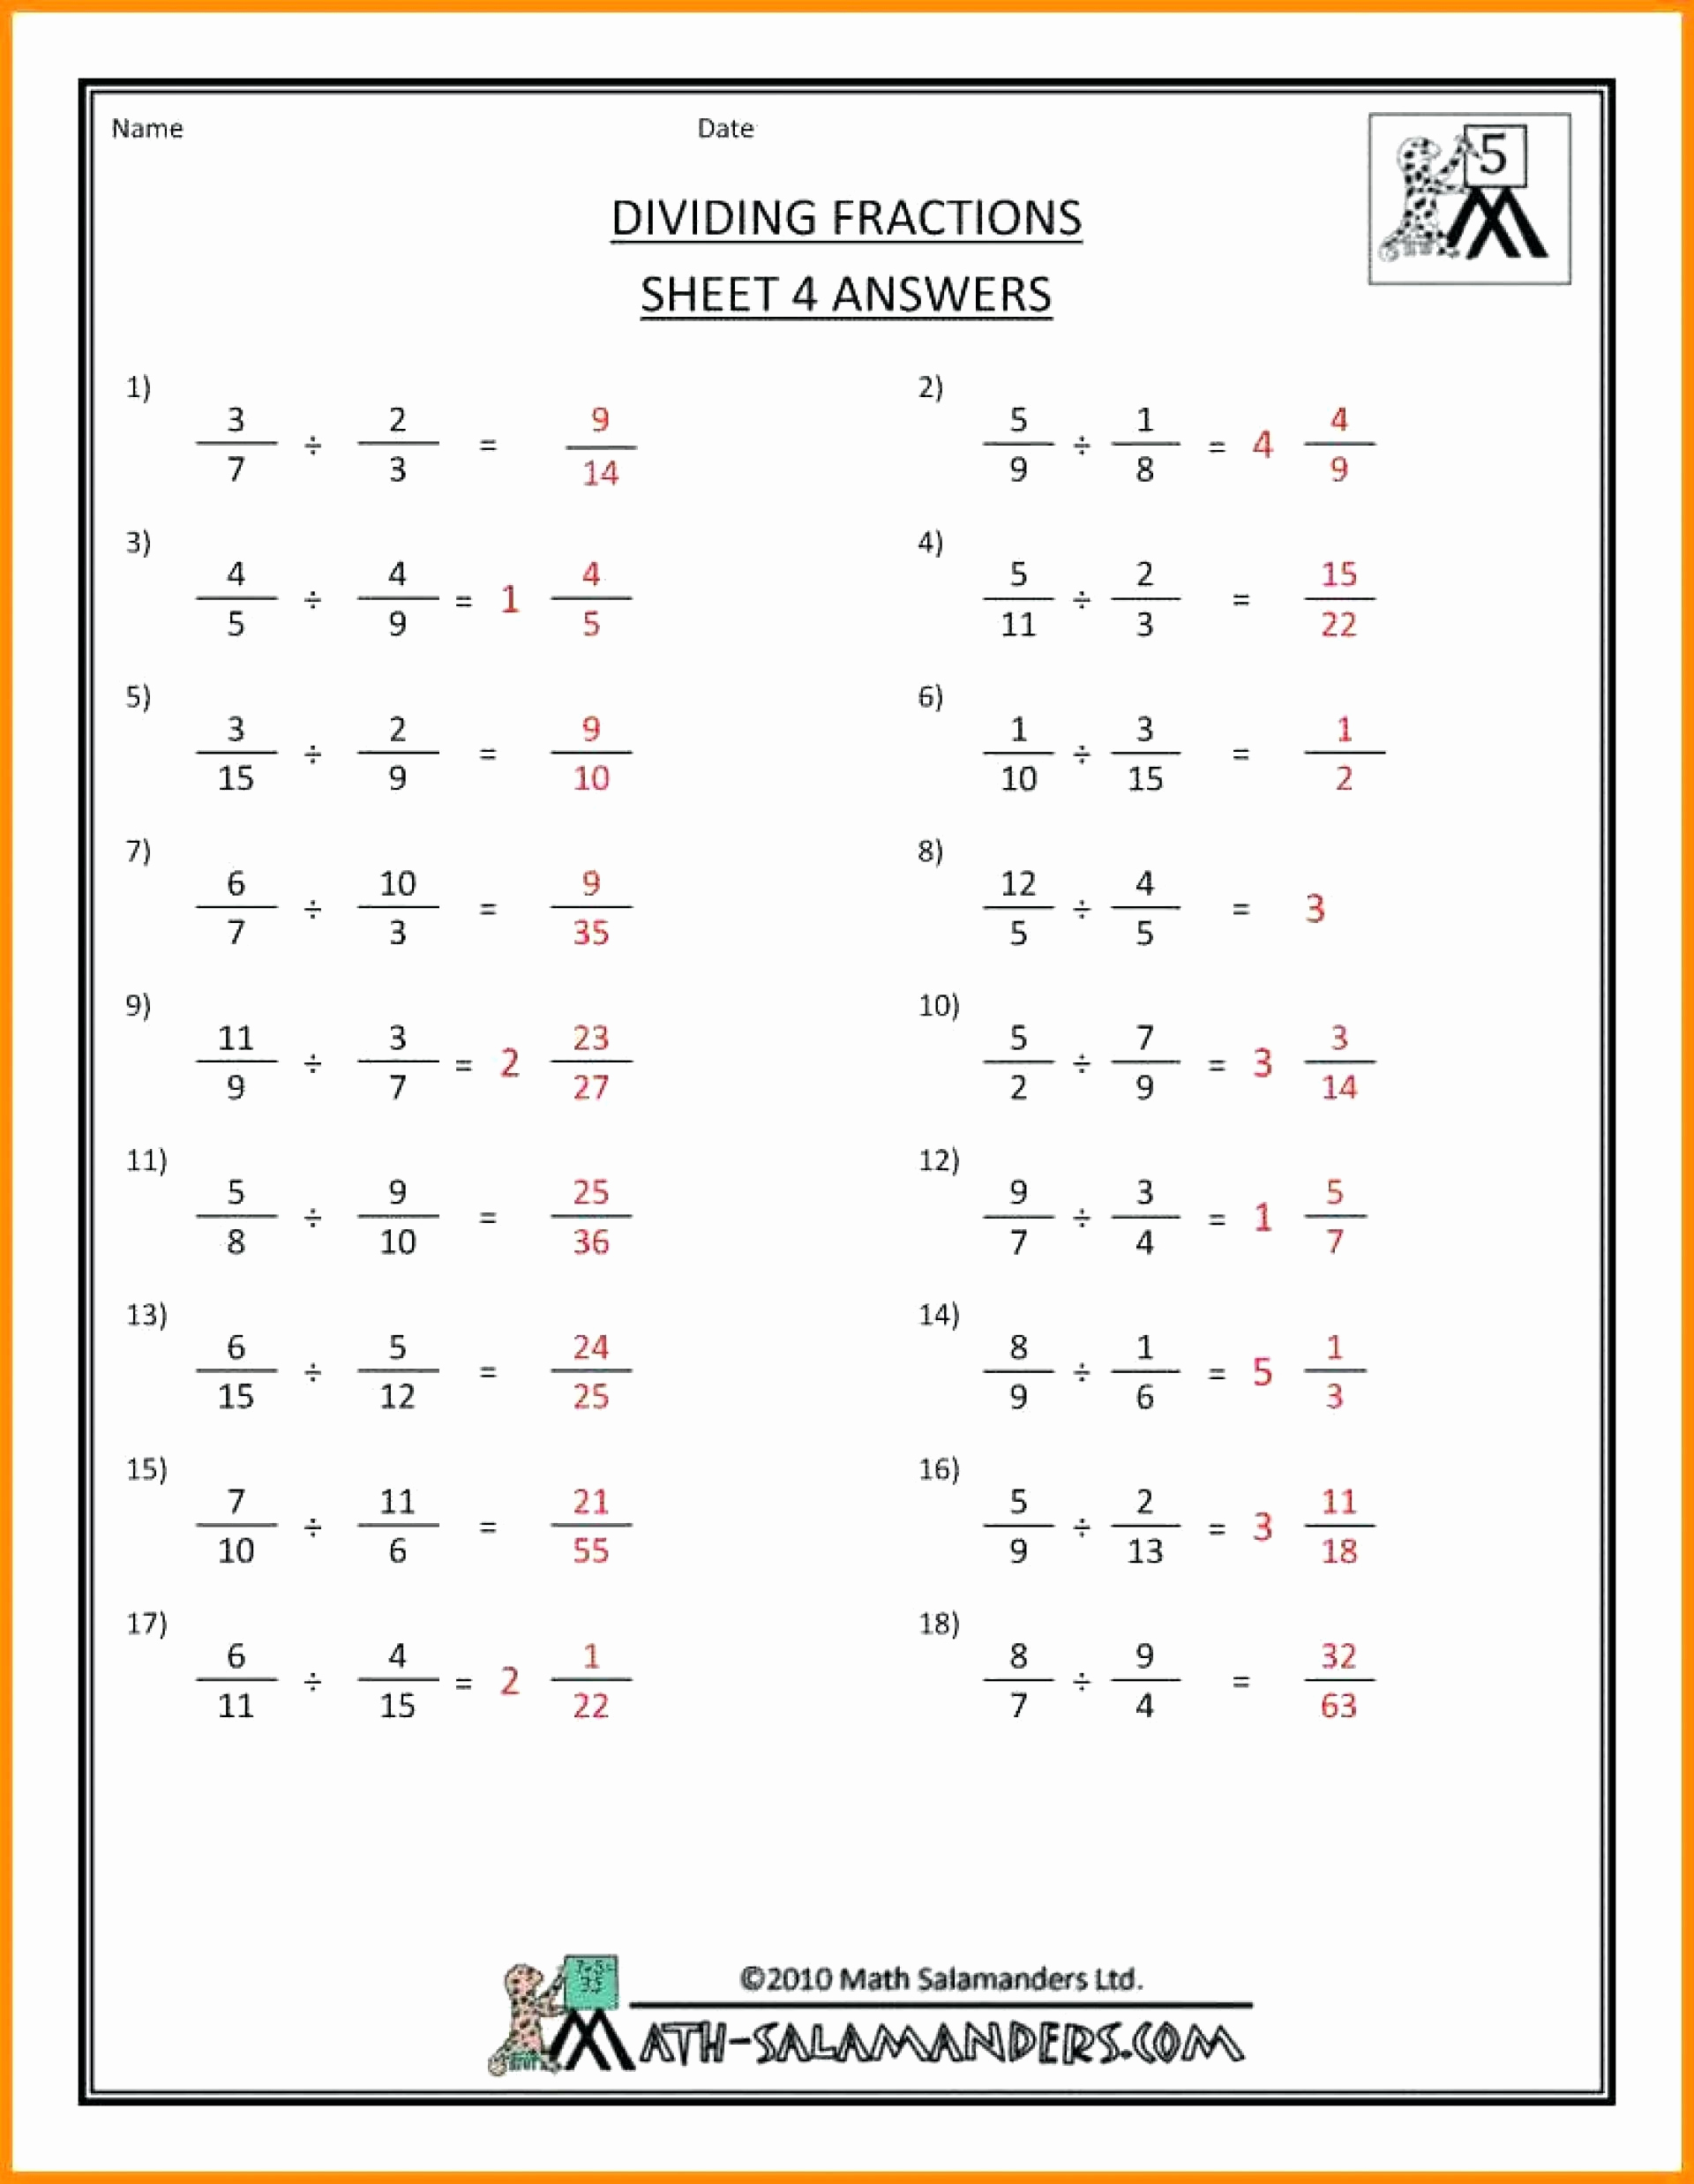 Fractions Common Core Worksheets Fresh Adding and Subtracting Fractions Worksheets Mon Core